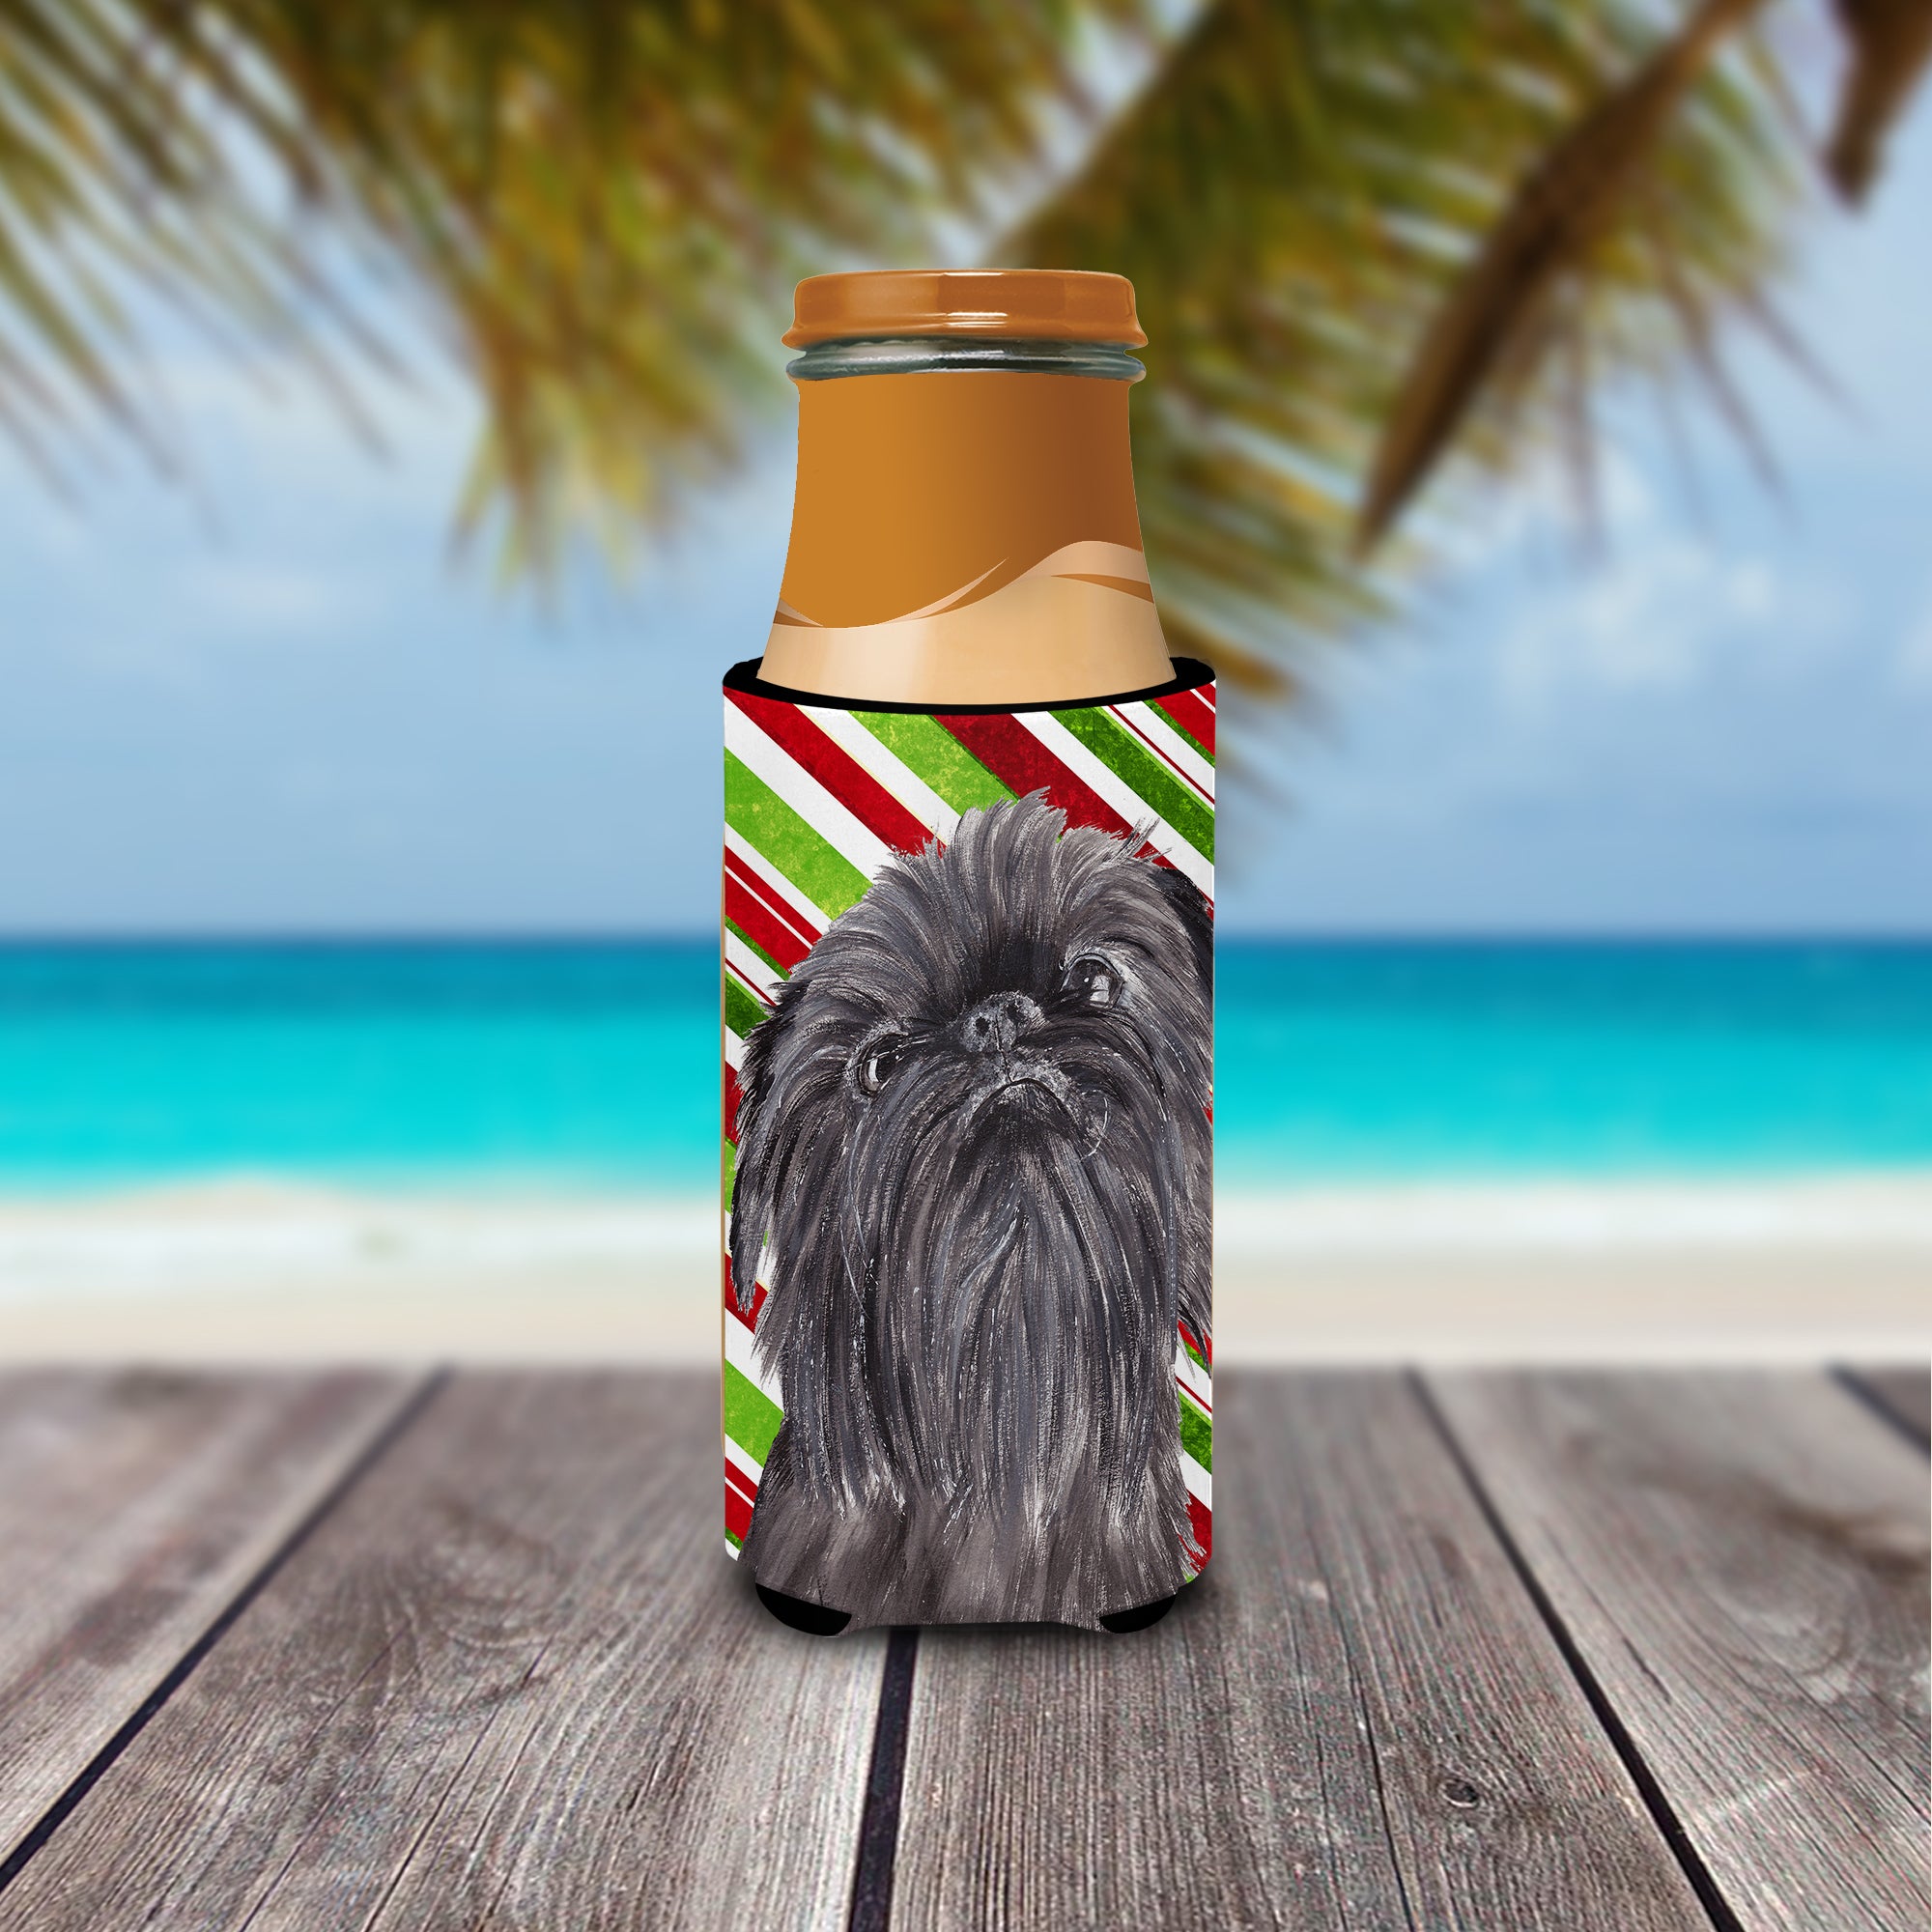 Brussels Griffon Candy Cane Christmas Ultra Beverage Insulators for slim cans